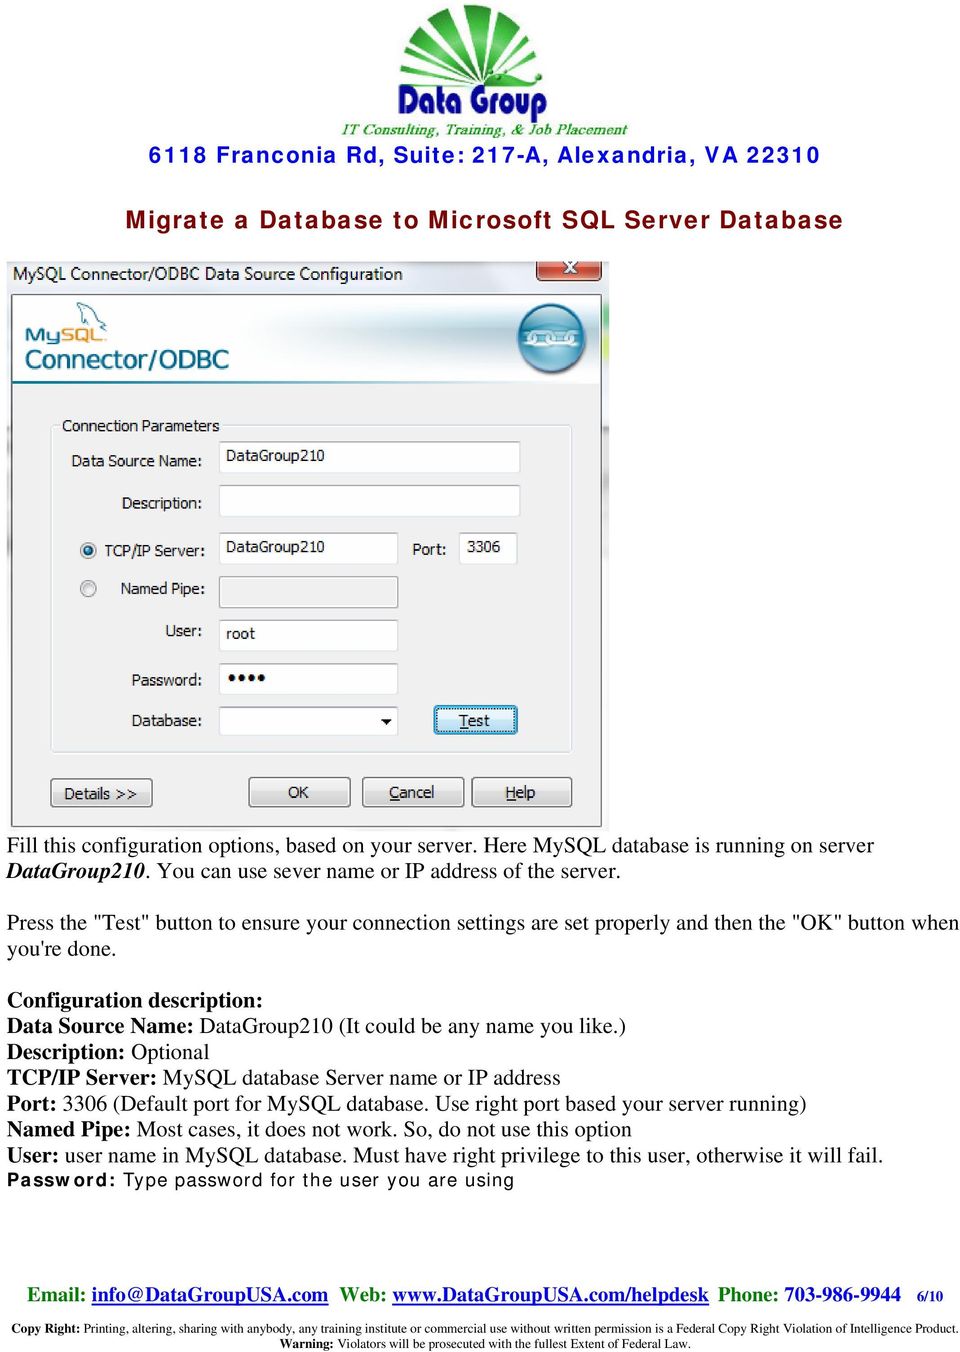 Configuration description: Data Source Name: DataGroup210 (It could be any name you like.